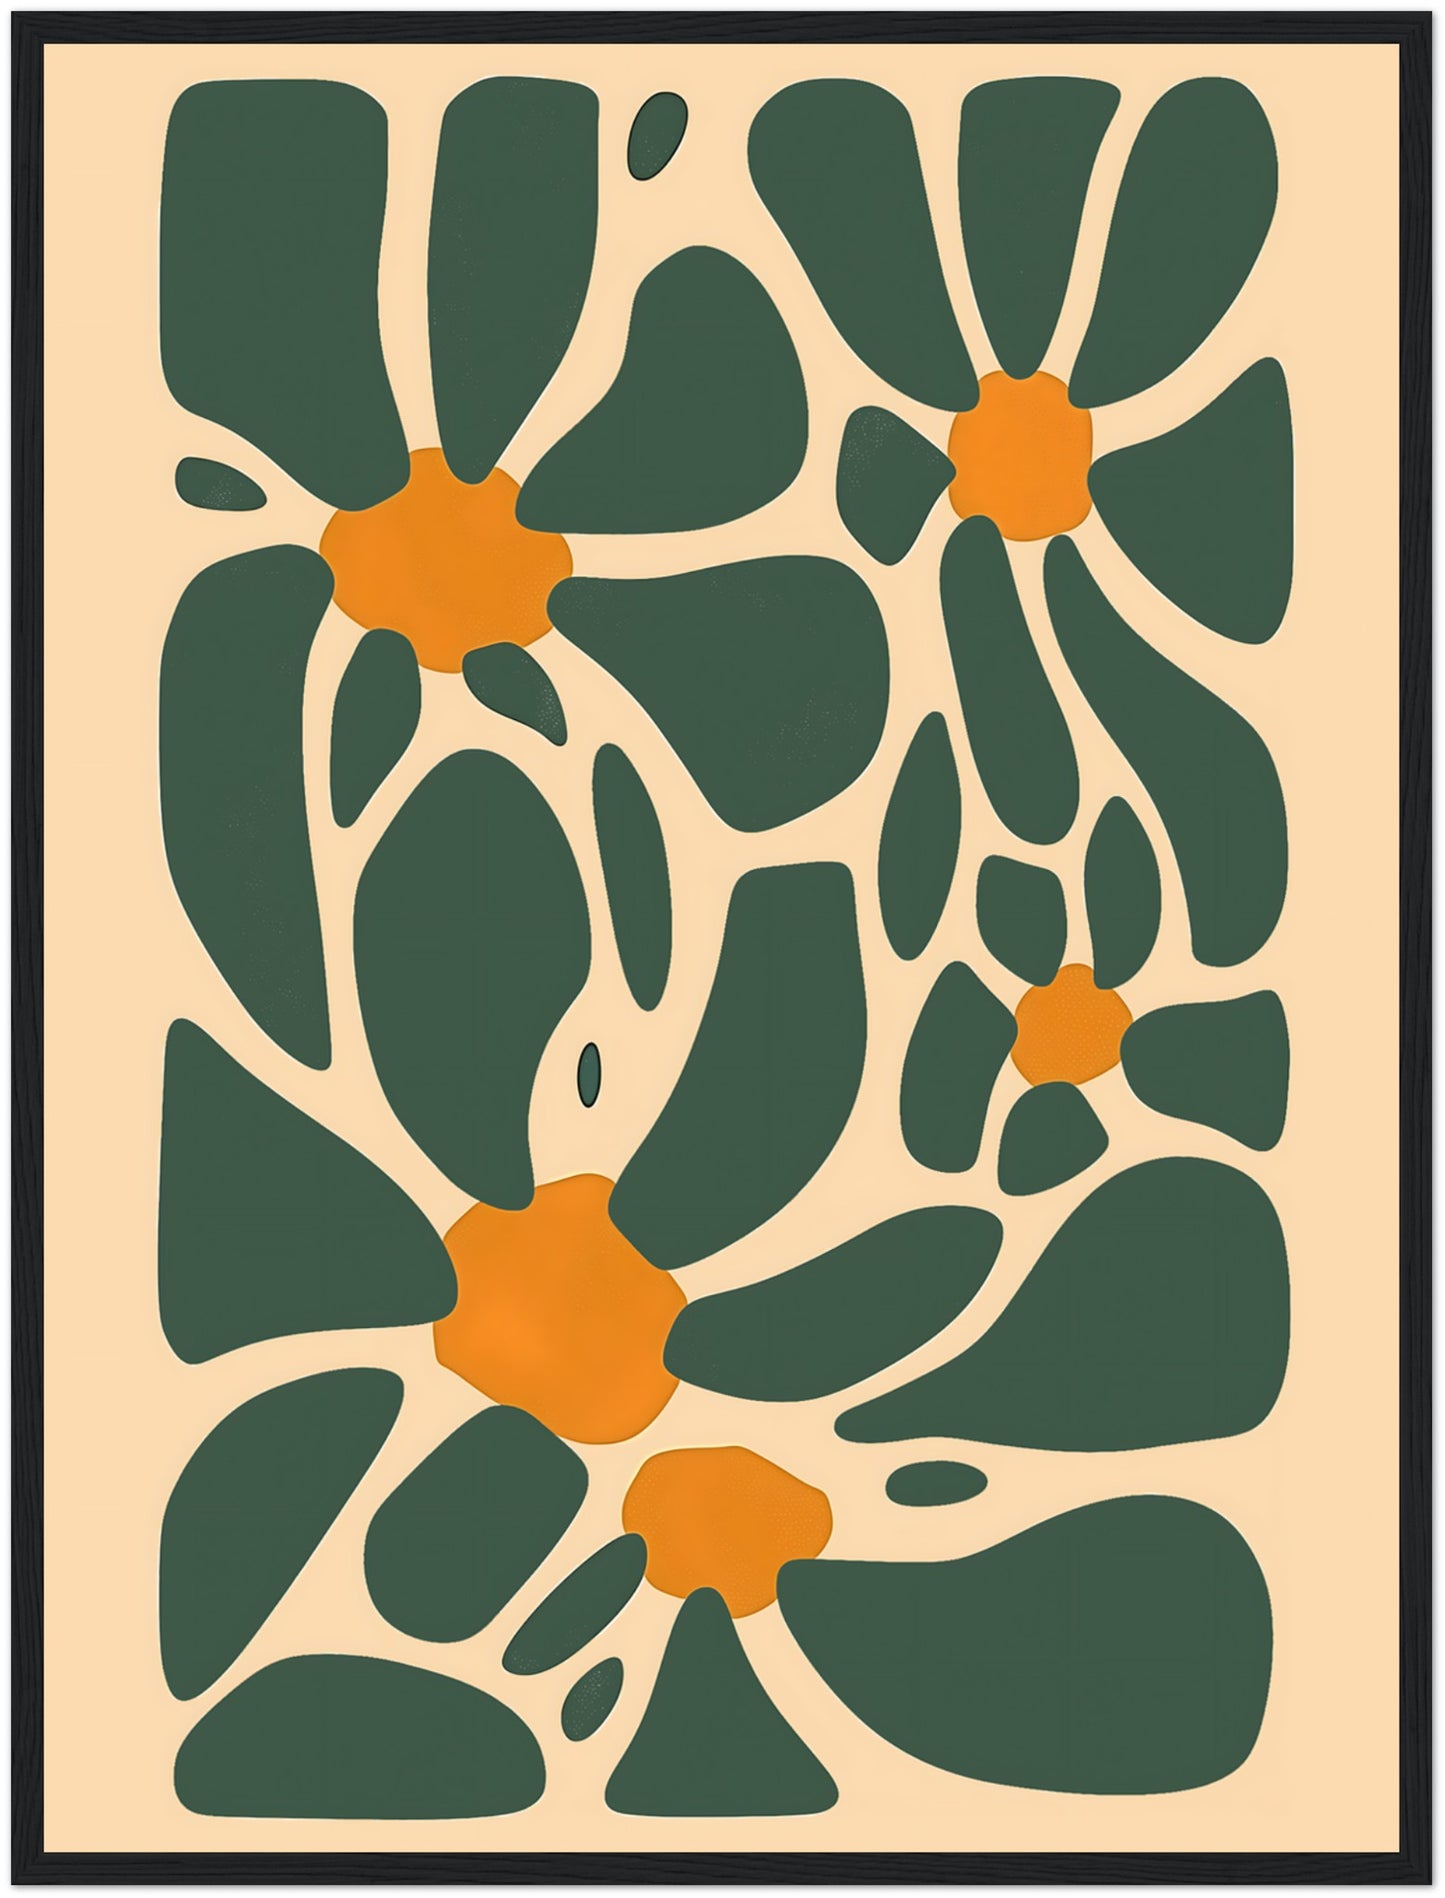 Abstract floral art with a retro color palette in a wooden frame.